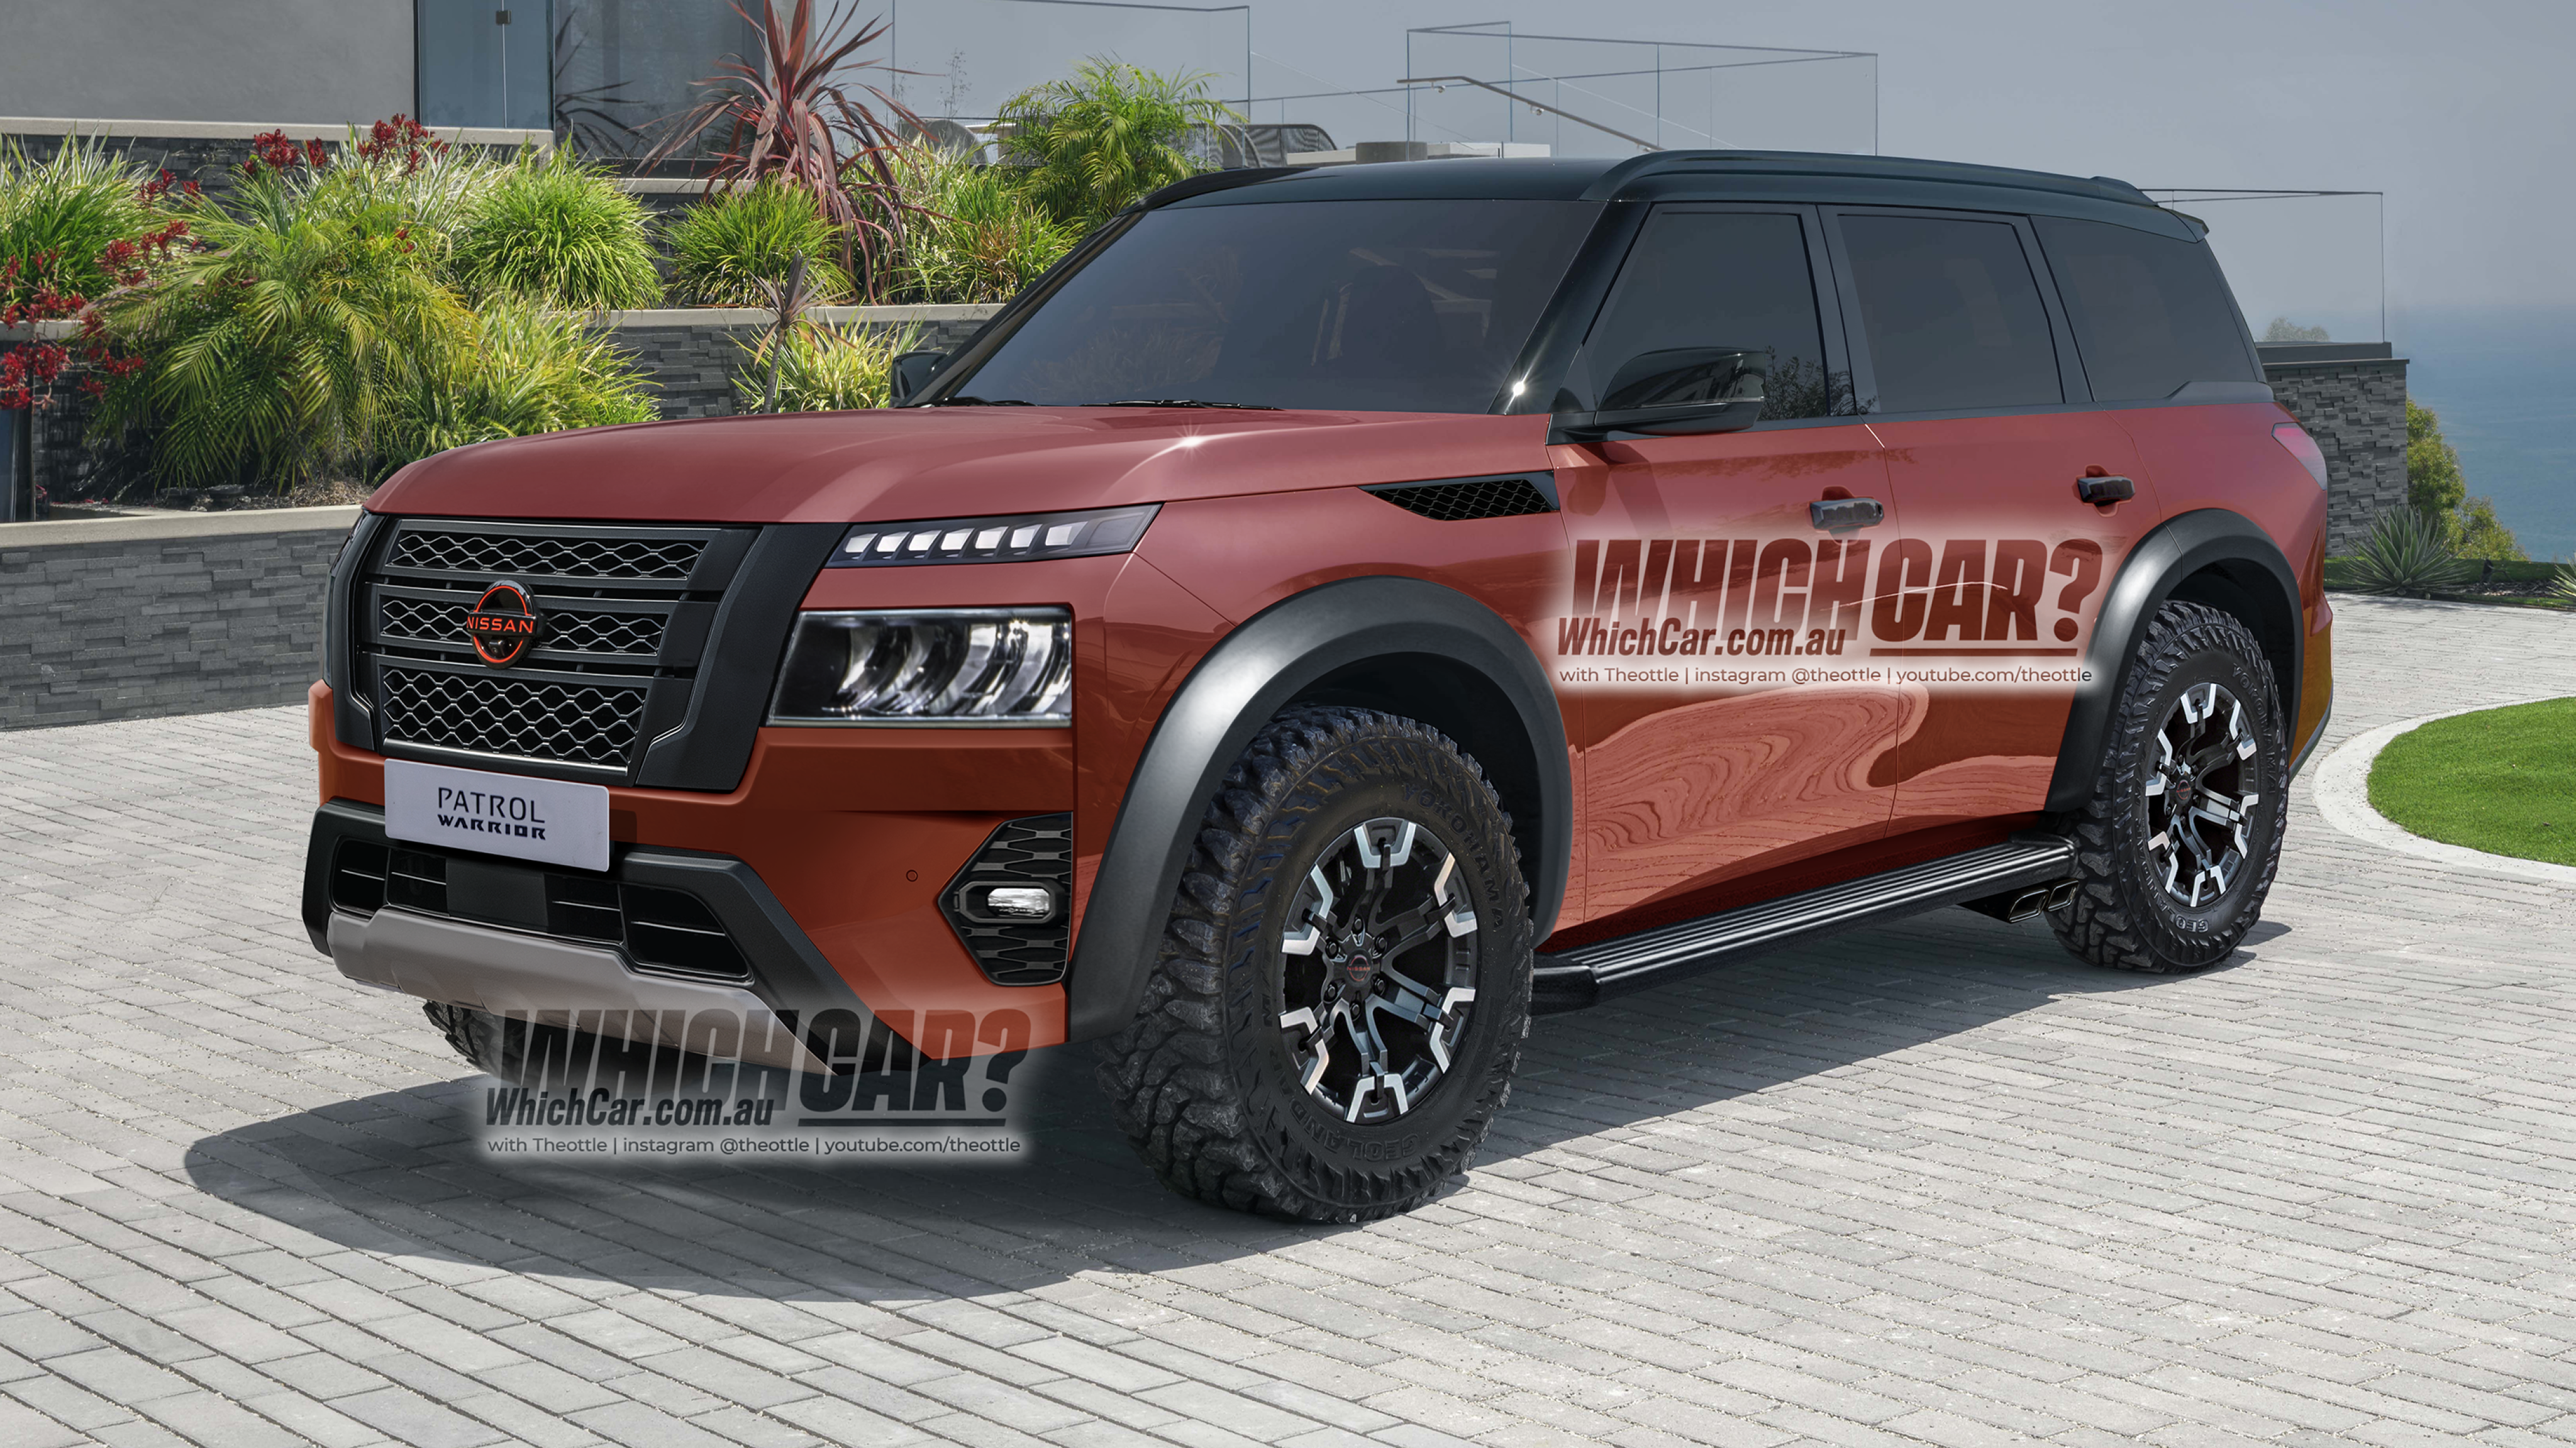 461220e1/2025 nissan patrol warrior imagined whichcar australia theottle 01 png